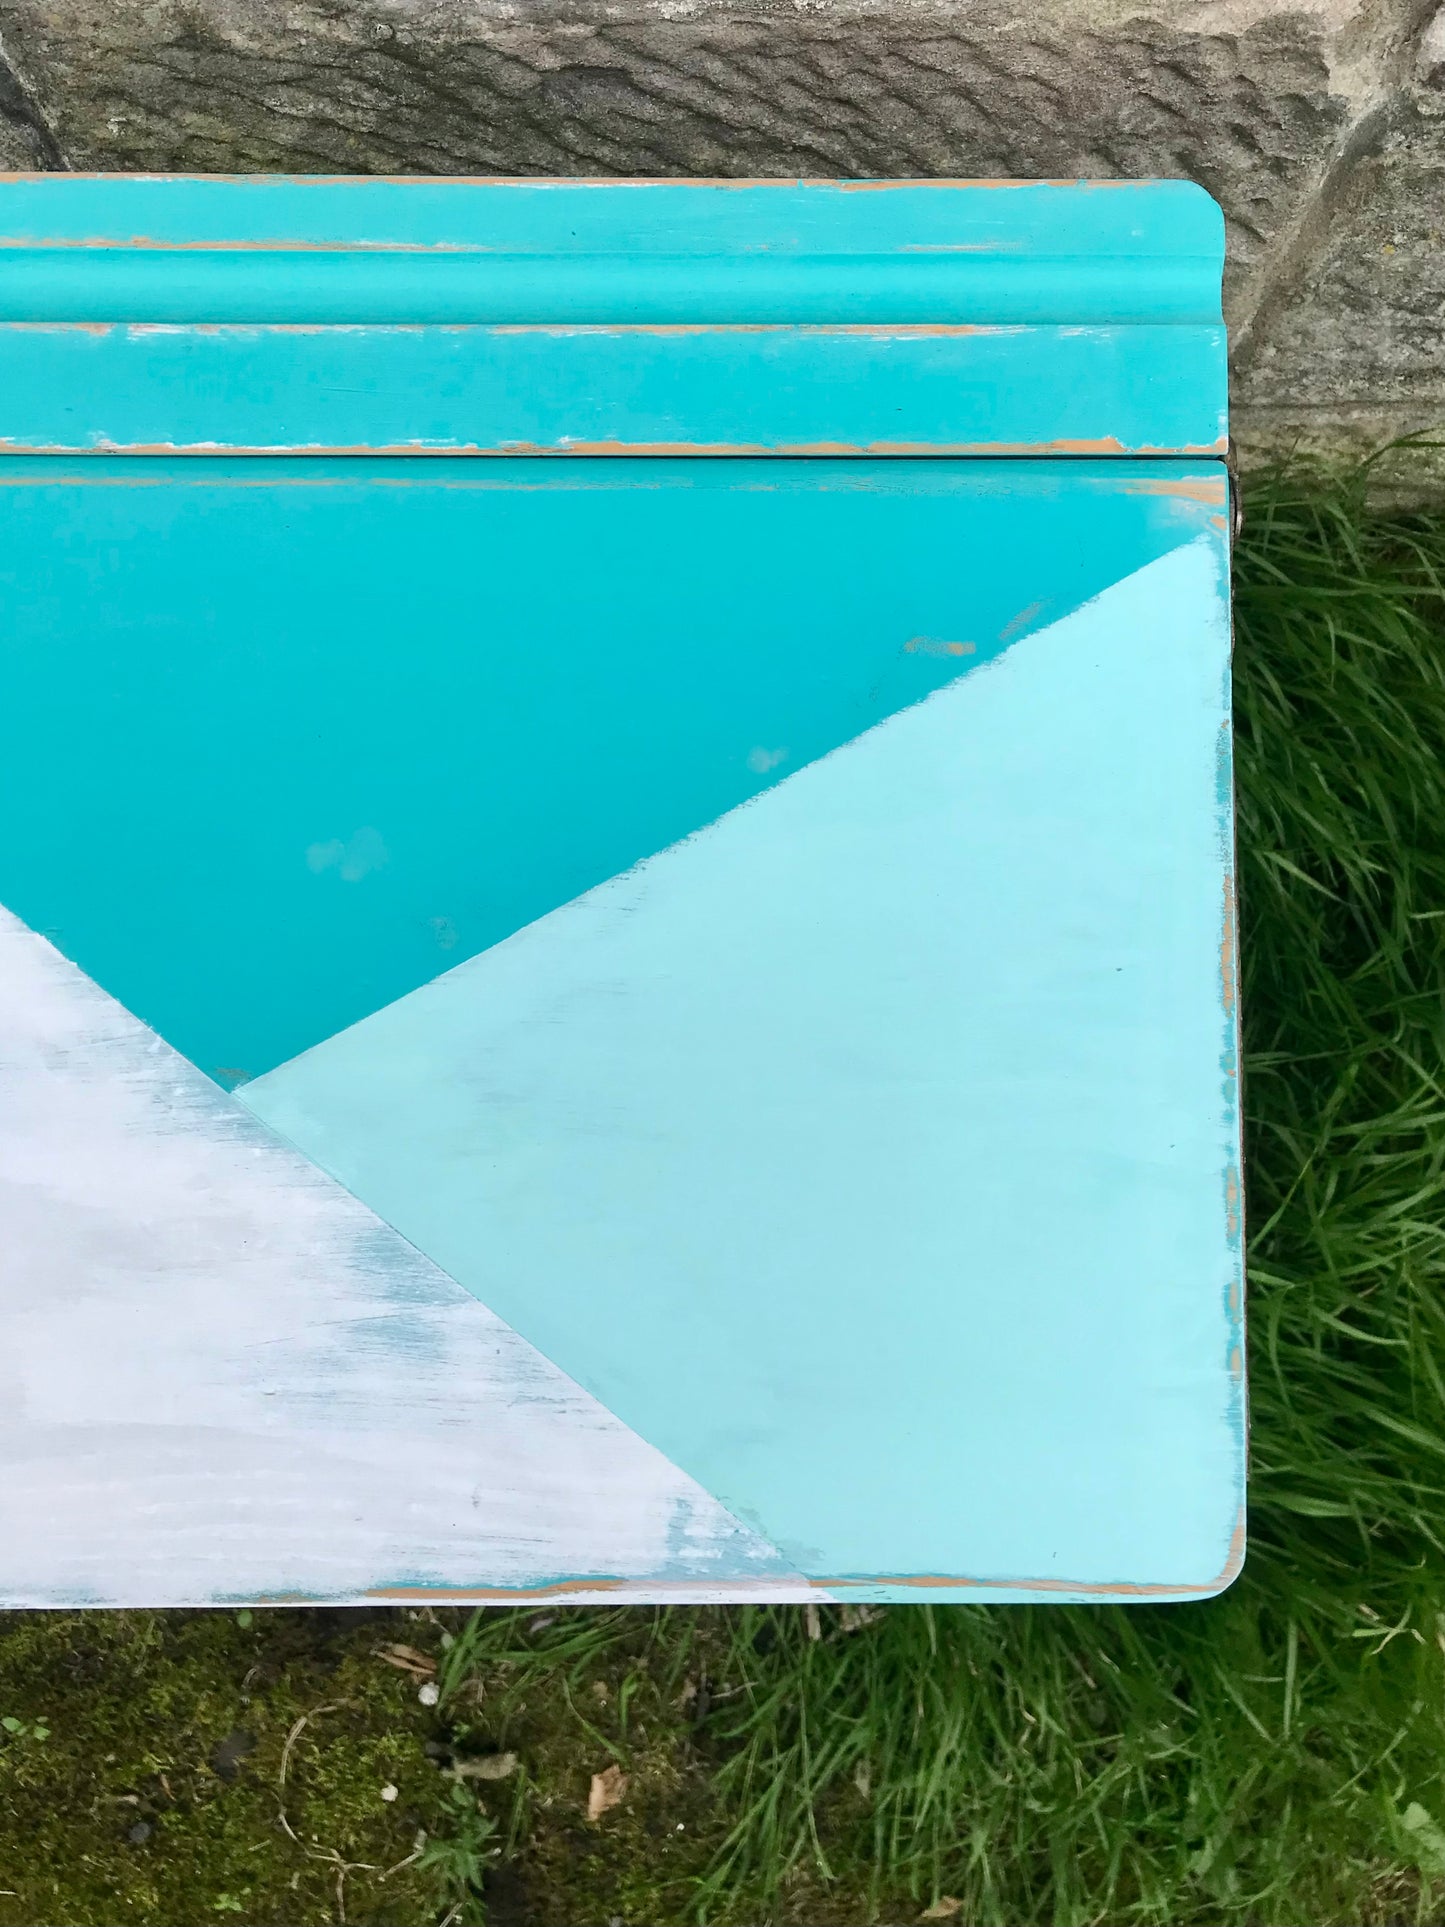 Children's painted desk in geometric blues and white - Please contact me for a shipping quote